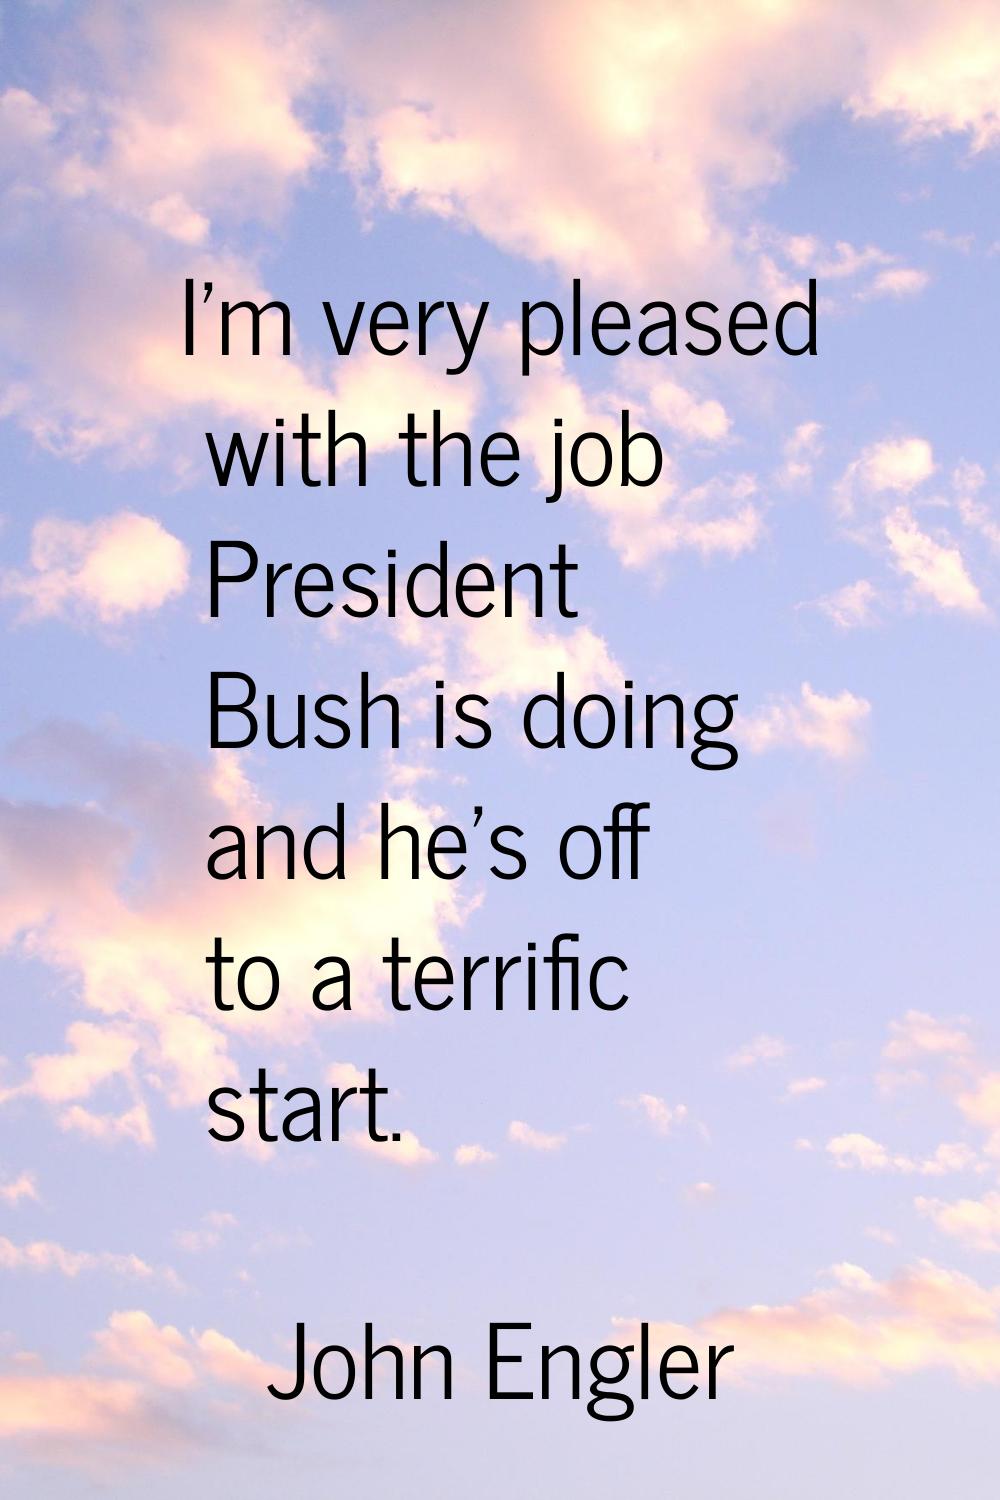 I'm very pleased with the job President Bush is doing and he's off to a terrific start.